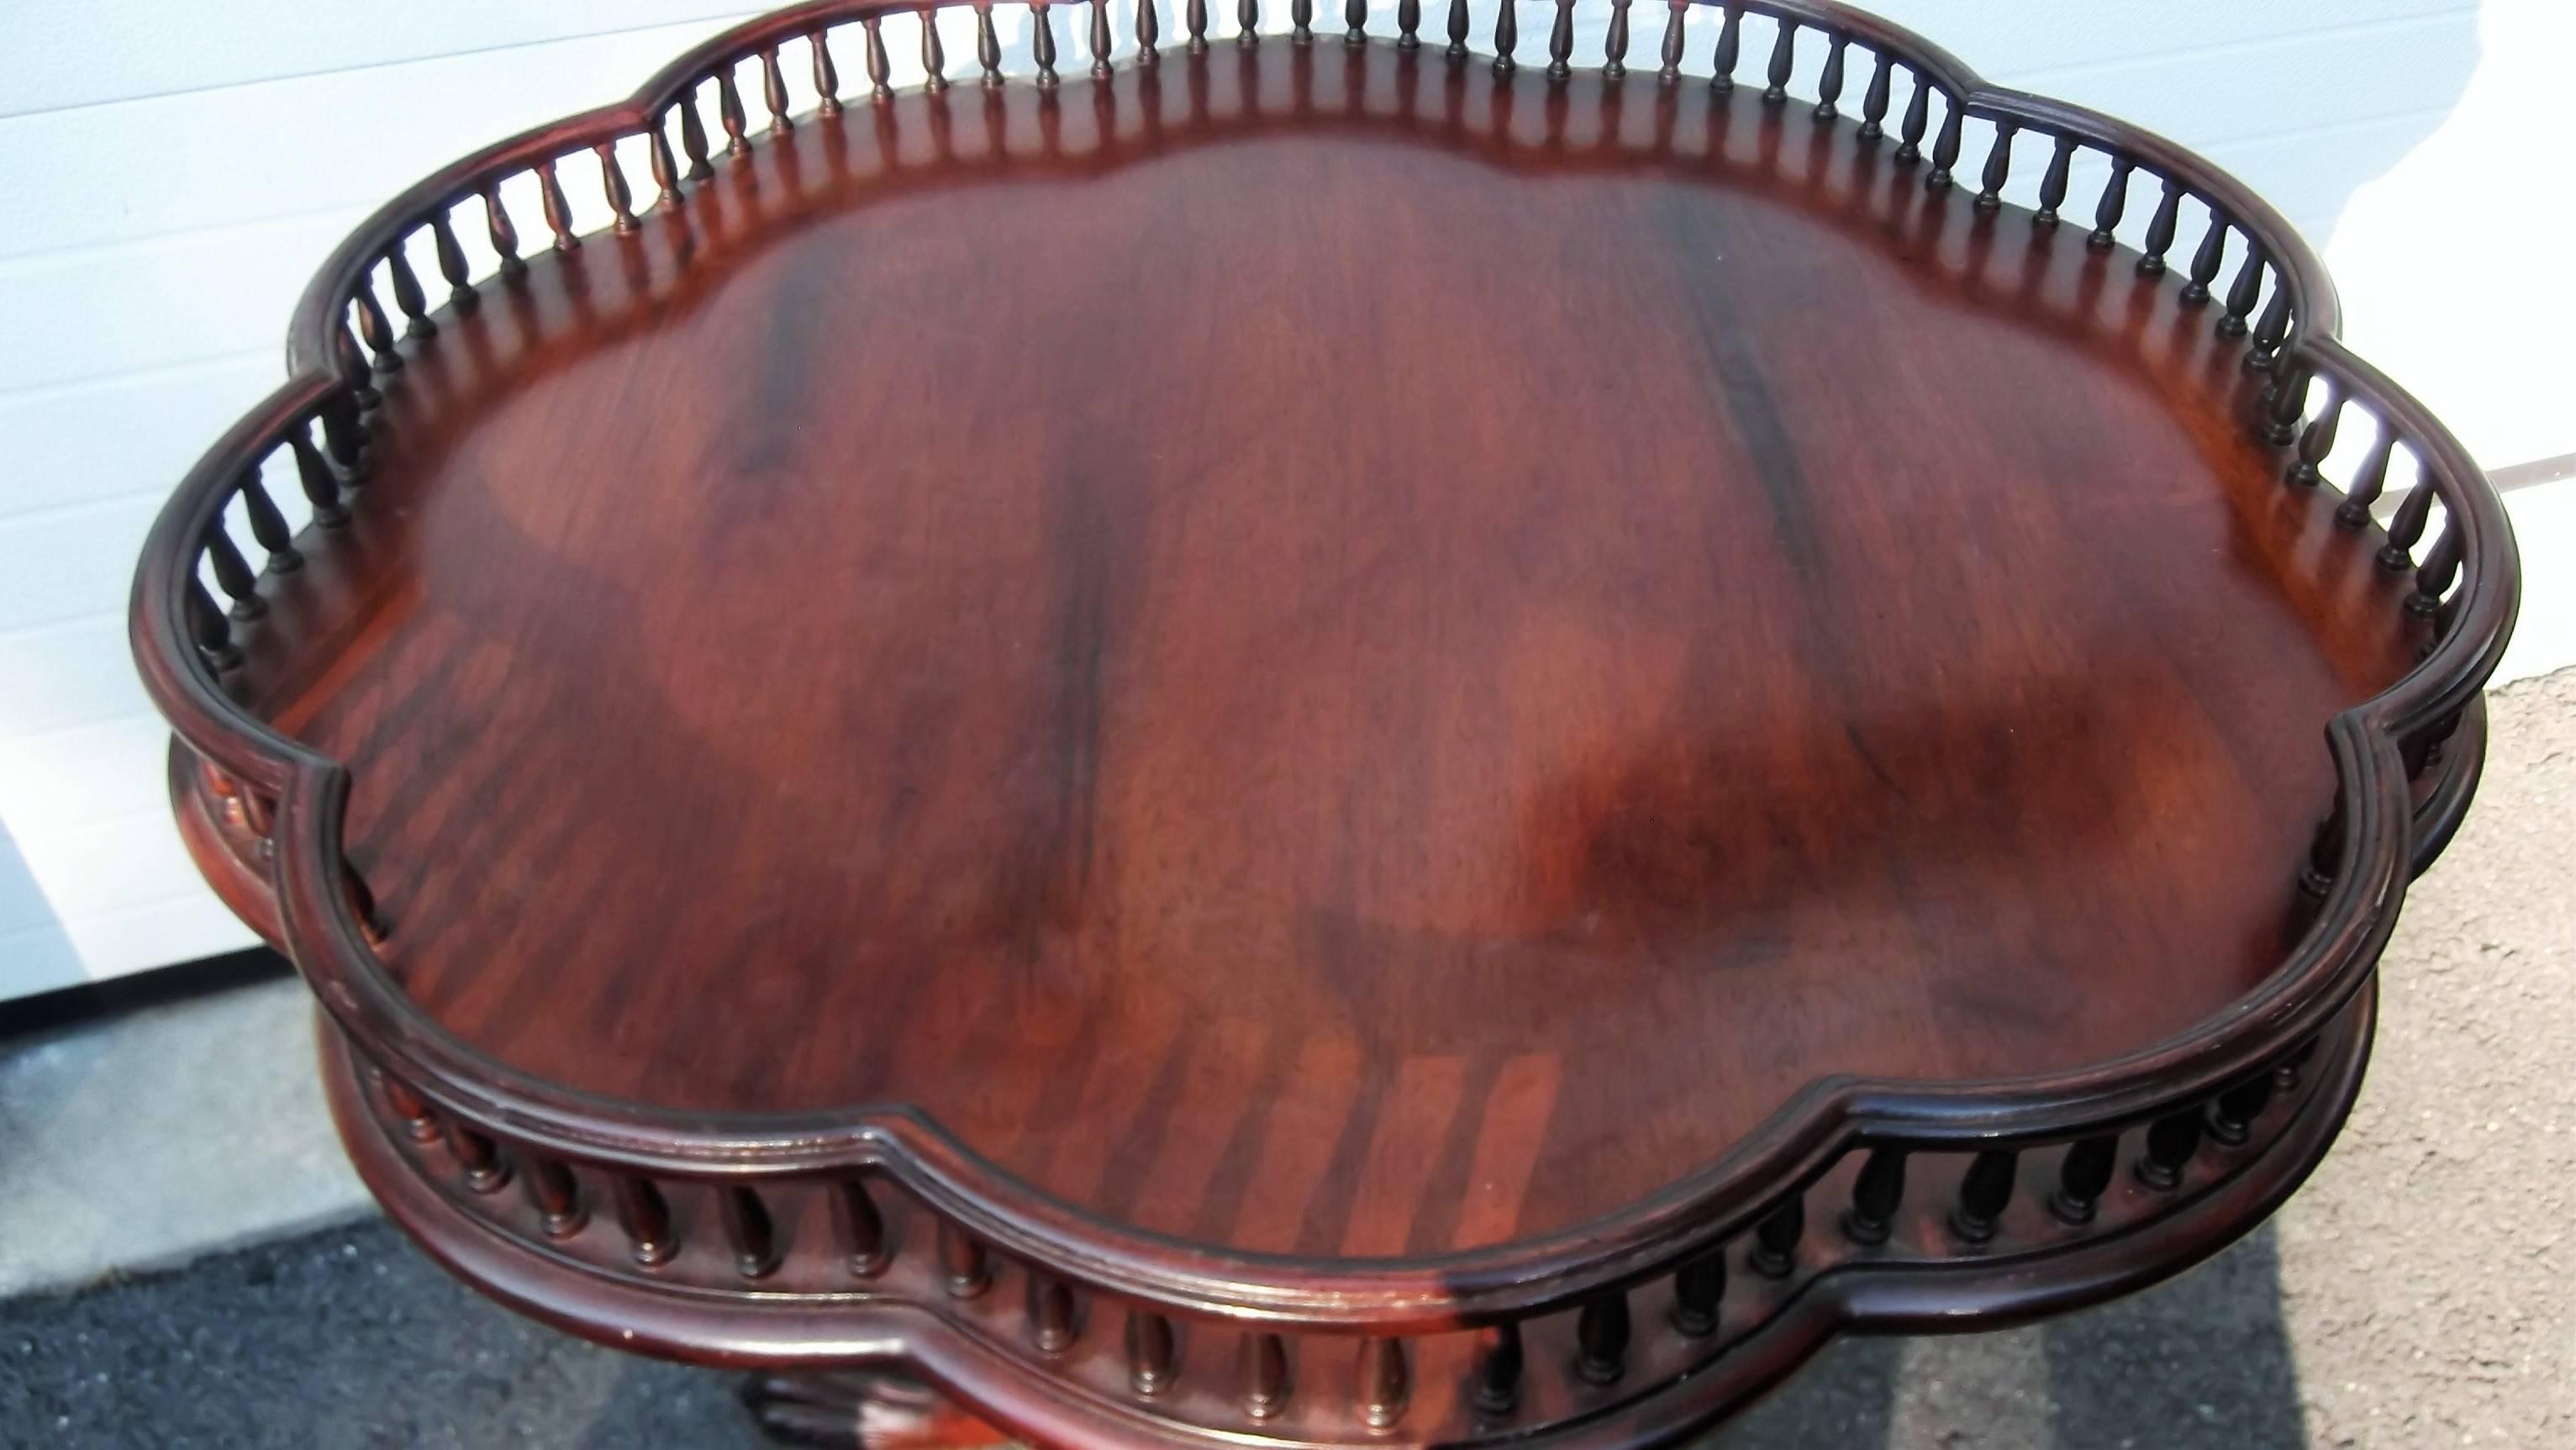 Mahogany table with scalloped gallery edge top. A center carved column resting on three carved paw foot legs. Solid mahogany with a nice reddish brown finish.